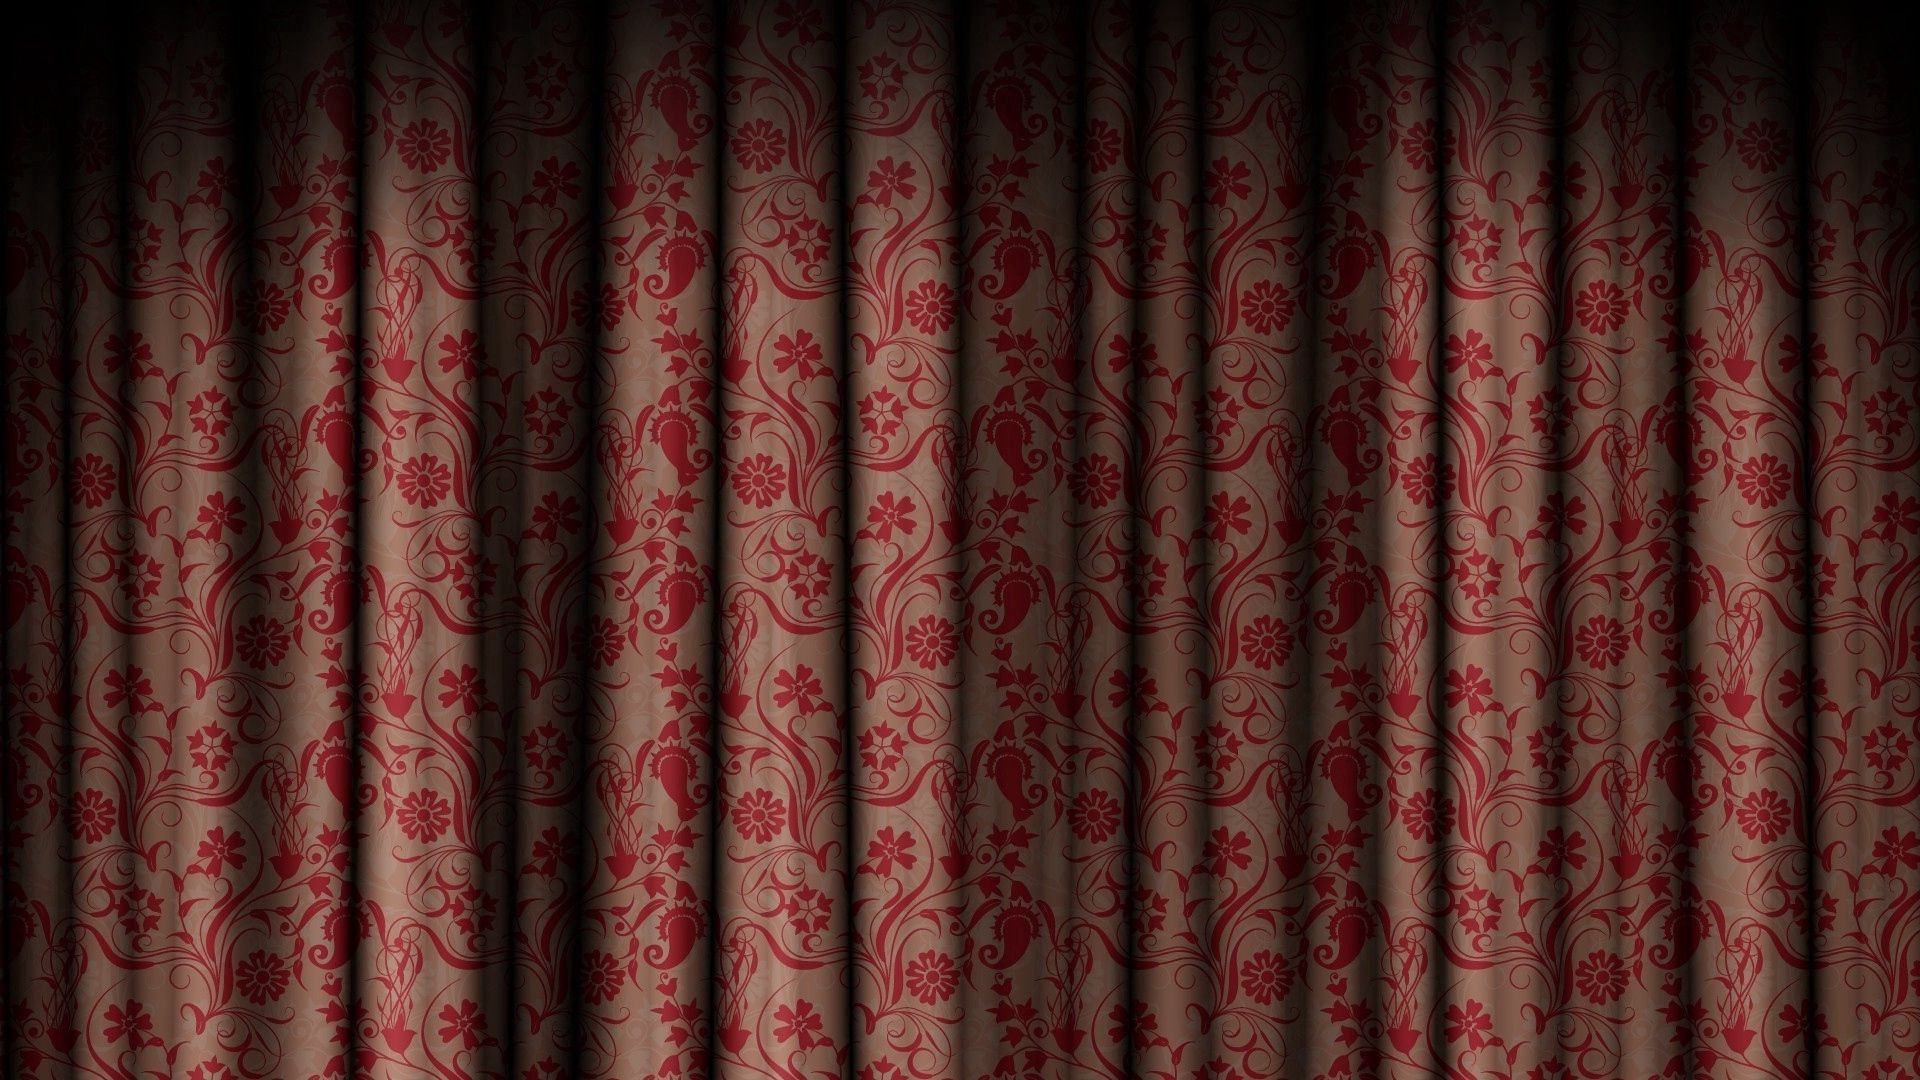 Download wallpaper 1920x1080 curtain, texture, patterns, colors hd  background